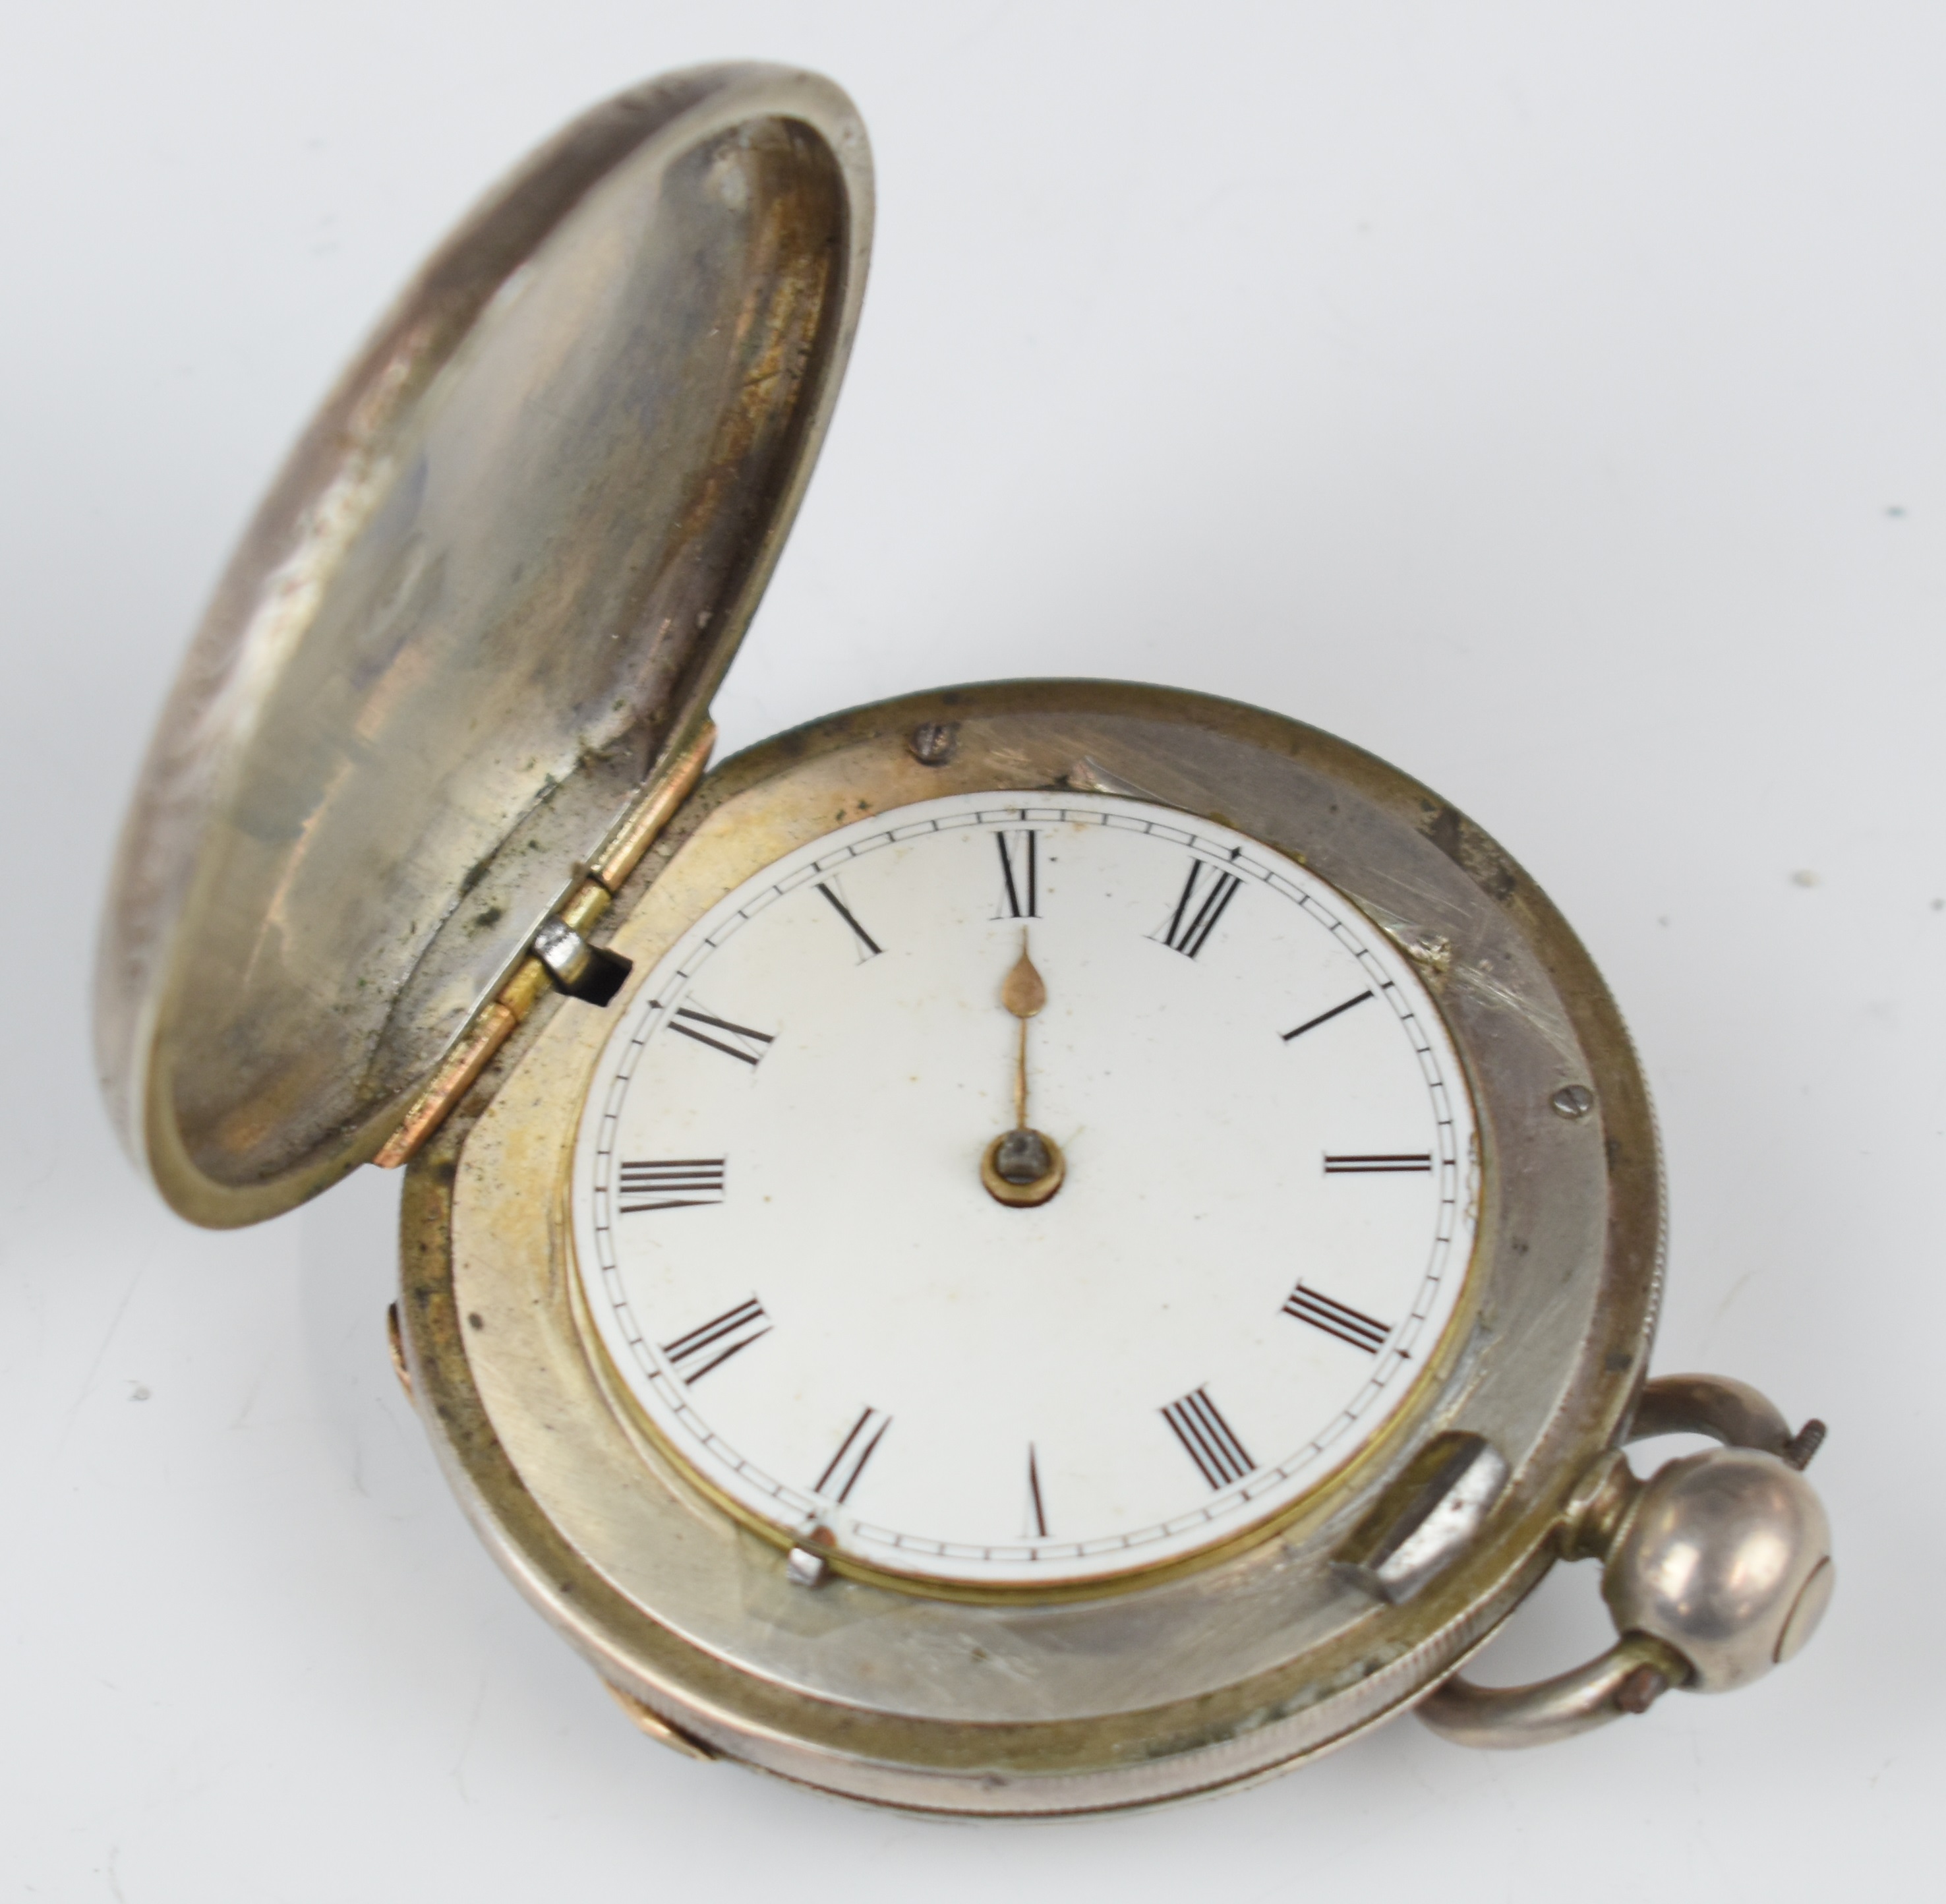 Hallmarked silver travelling clock, marks rubbed but engraved for 1922, length when folded away 7cm, - Image 5 of 5